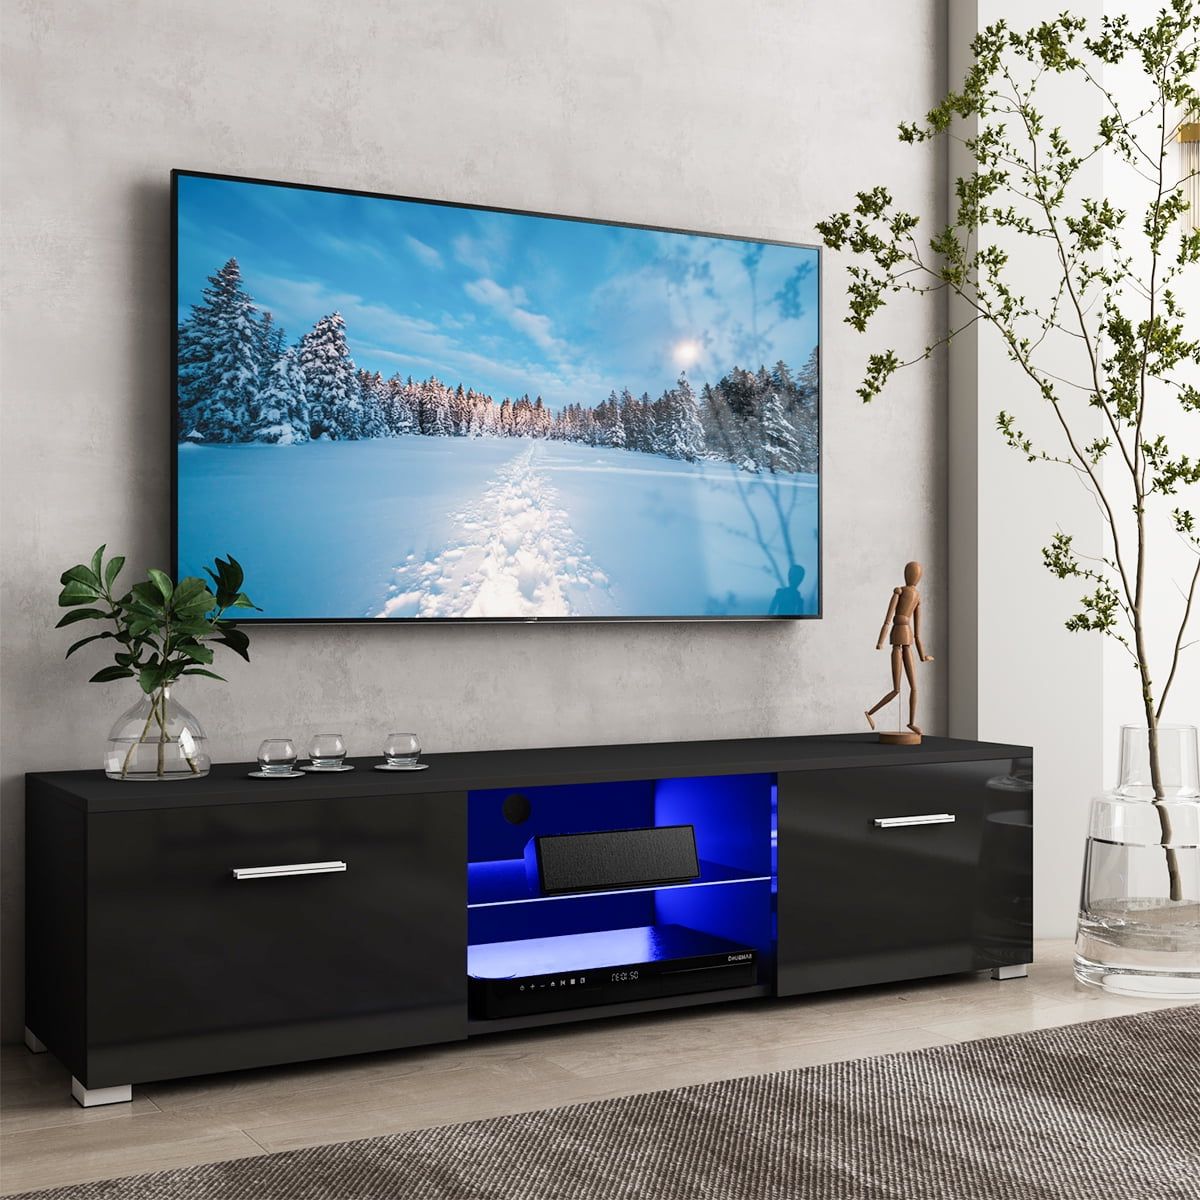 Modern Entertainment Center With Rgb Led Lights For Italy | Ubuy Pertaining To Rgb Tv Entertainment Centers (View 7 of 20)